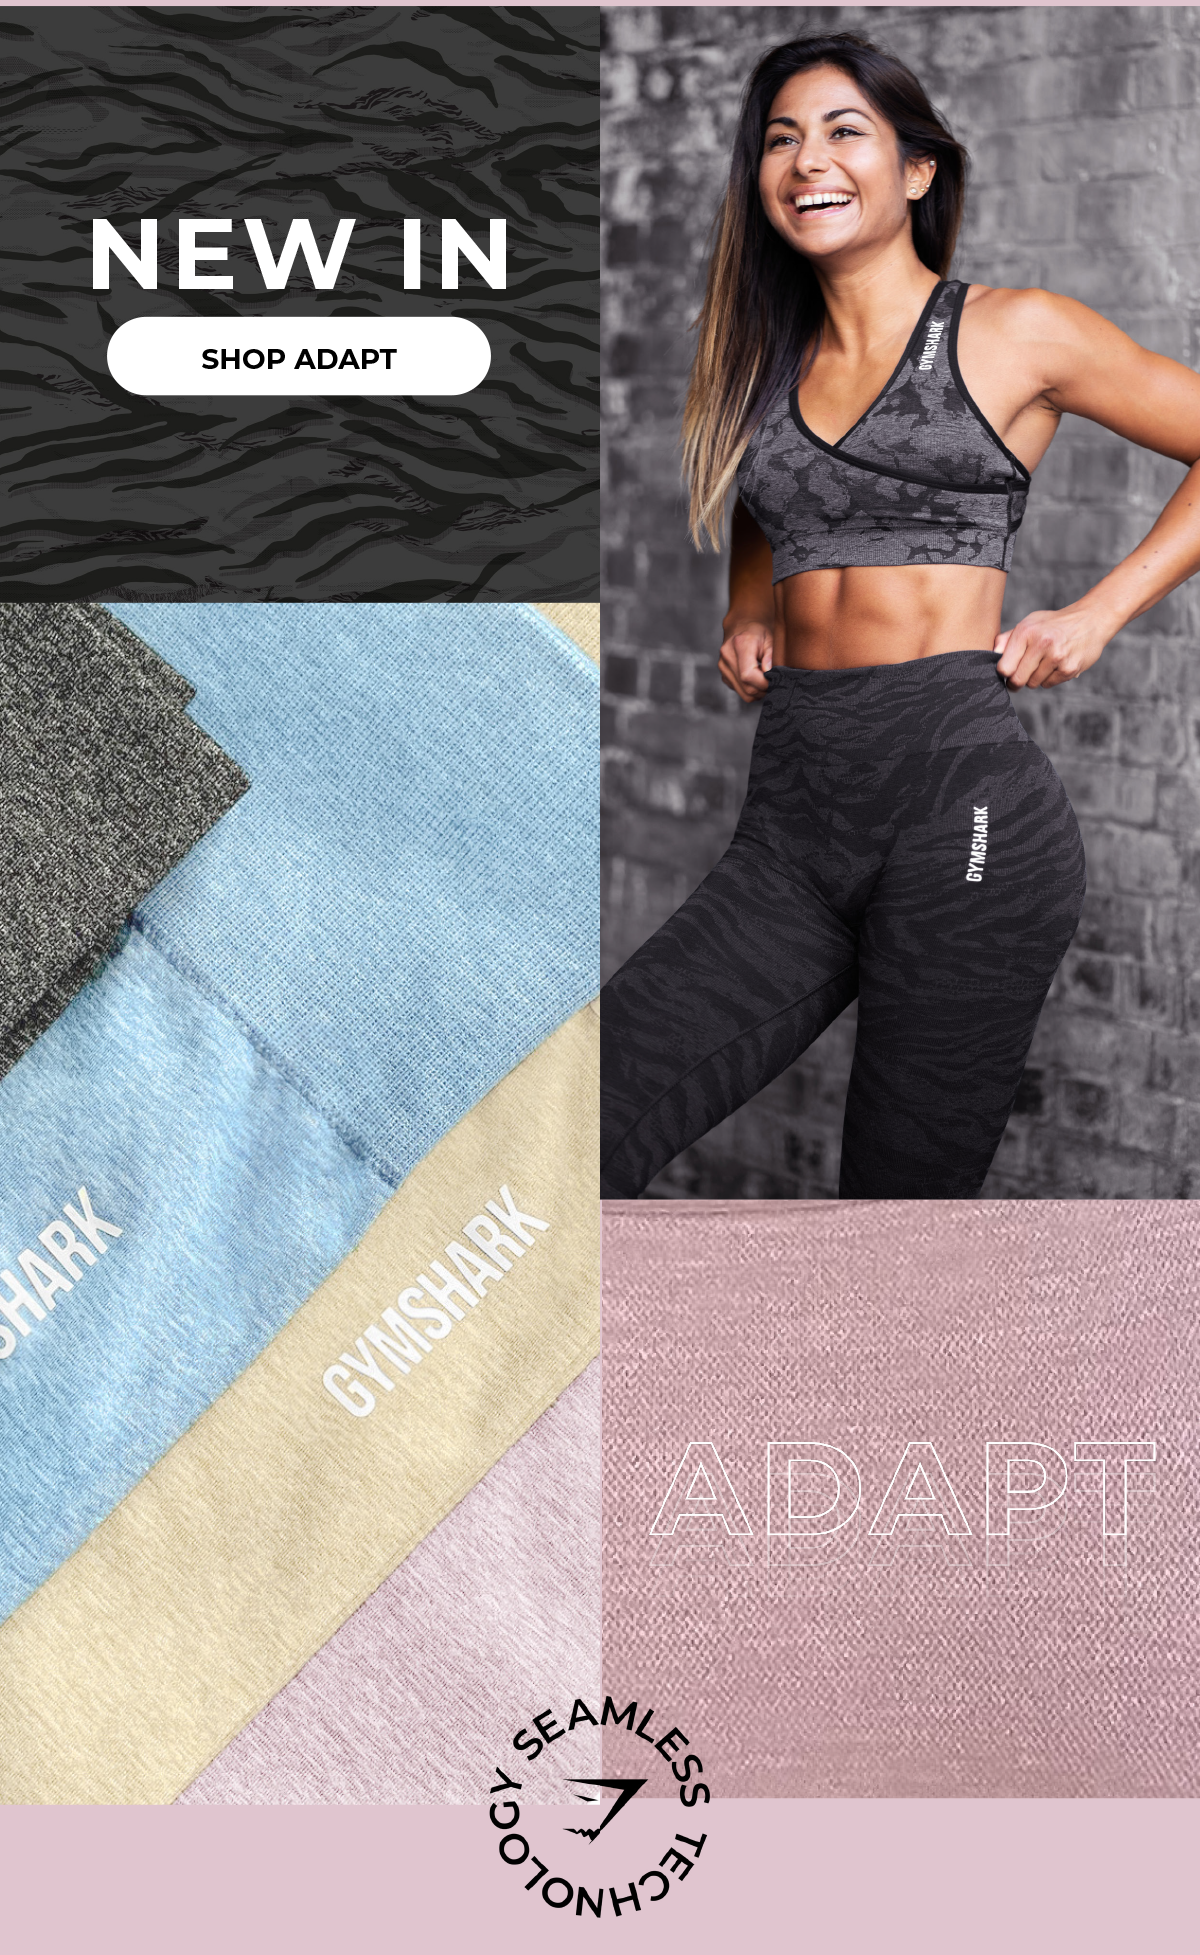 NEW IN. SHOP ADAPT.